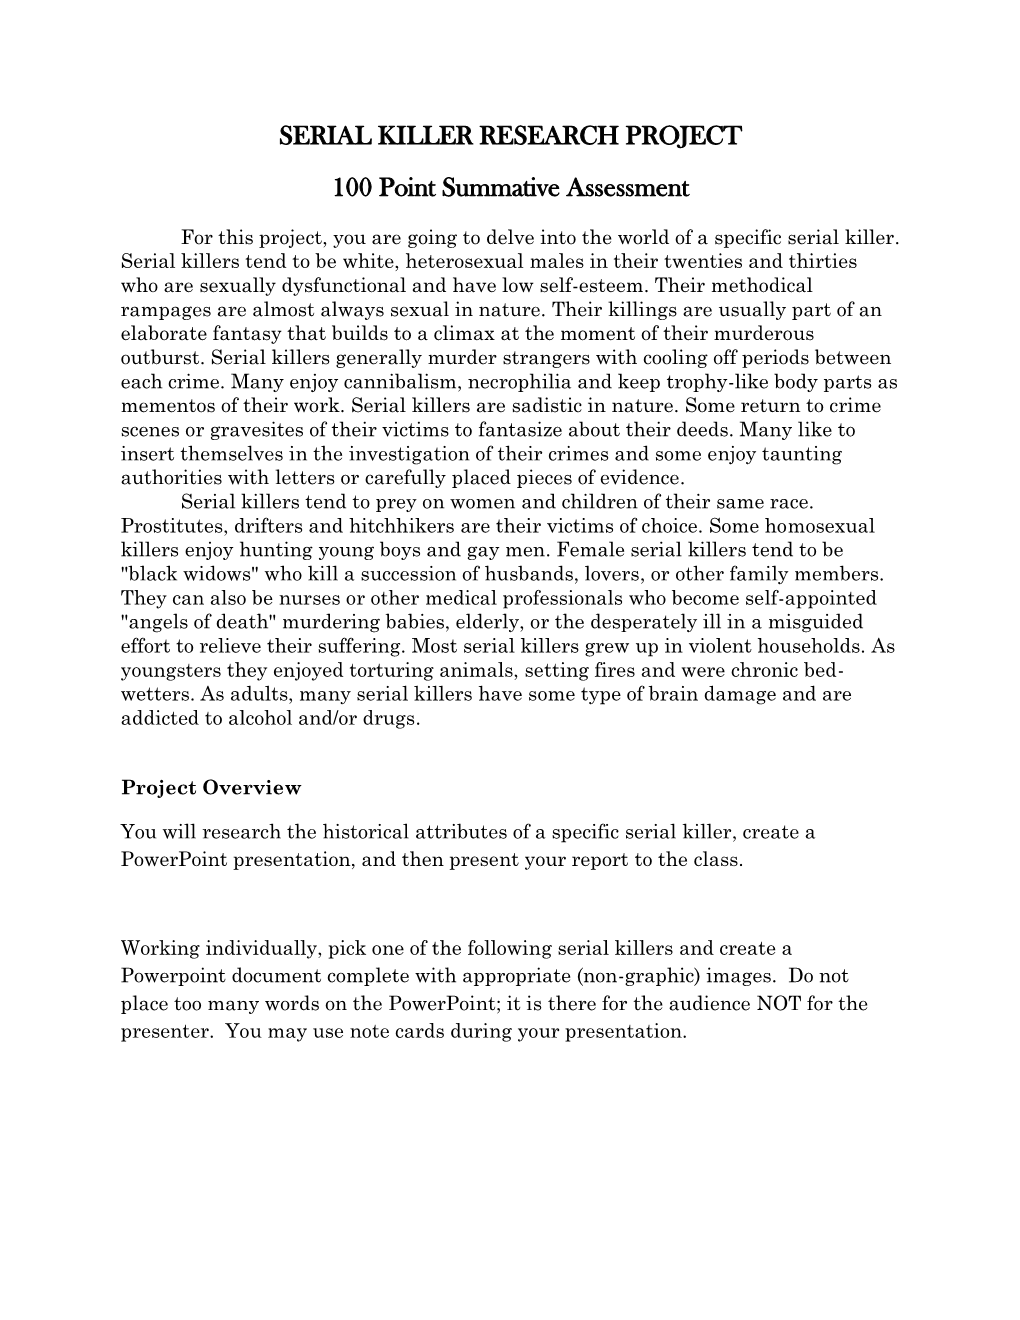 SERIAL KILLER RESEARCH PROJECT 100 Point Summative Assessment